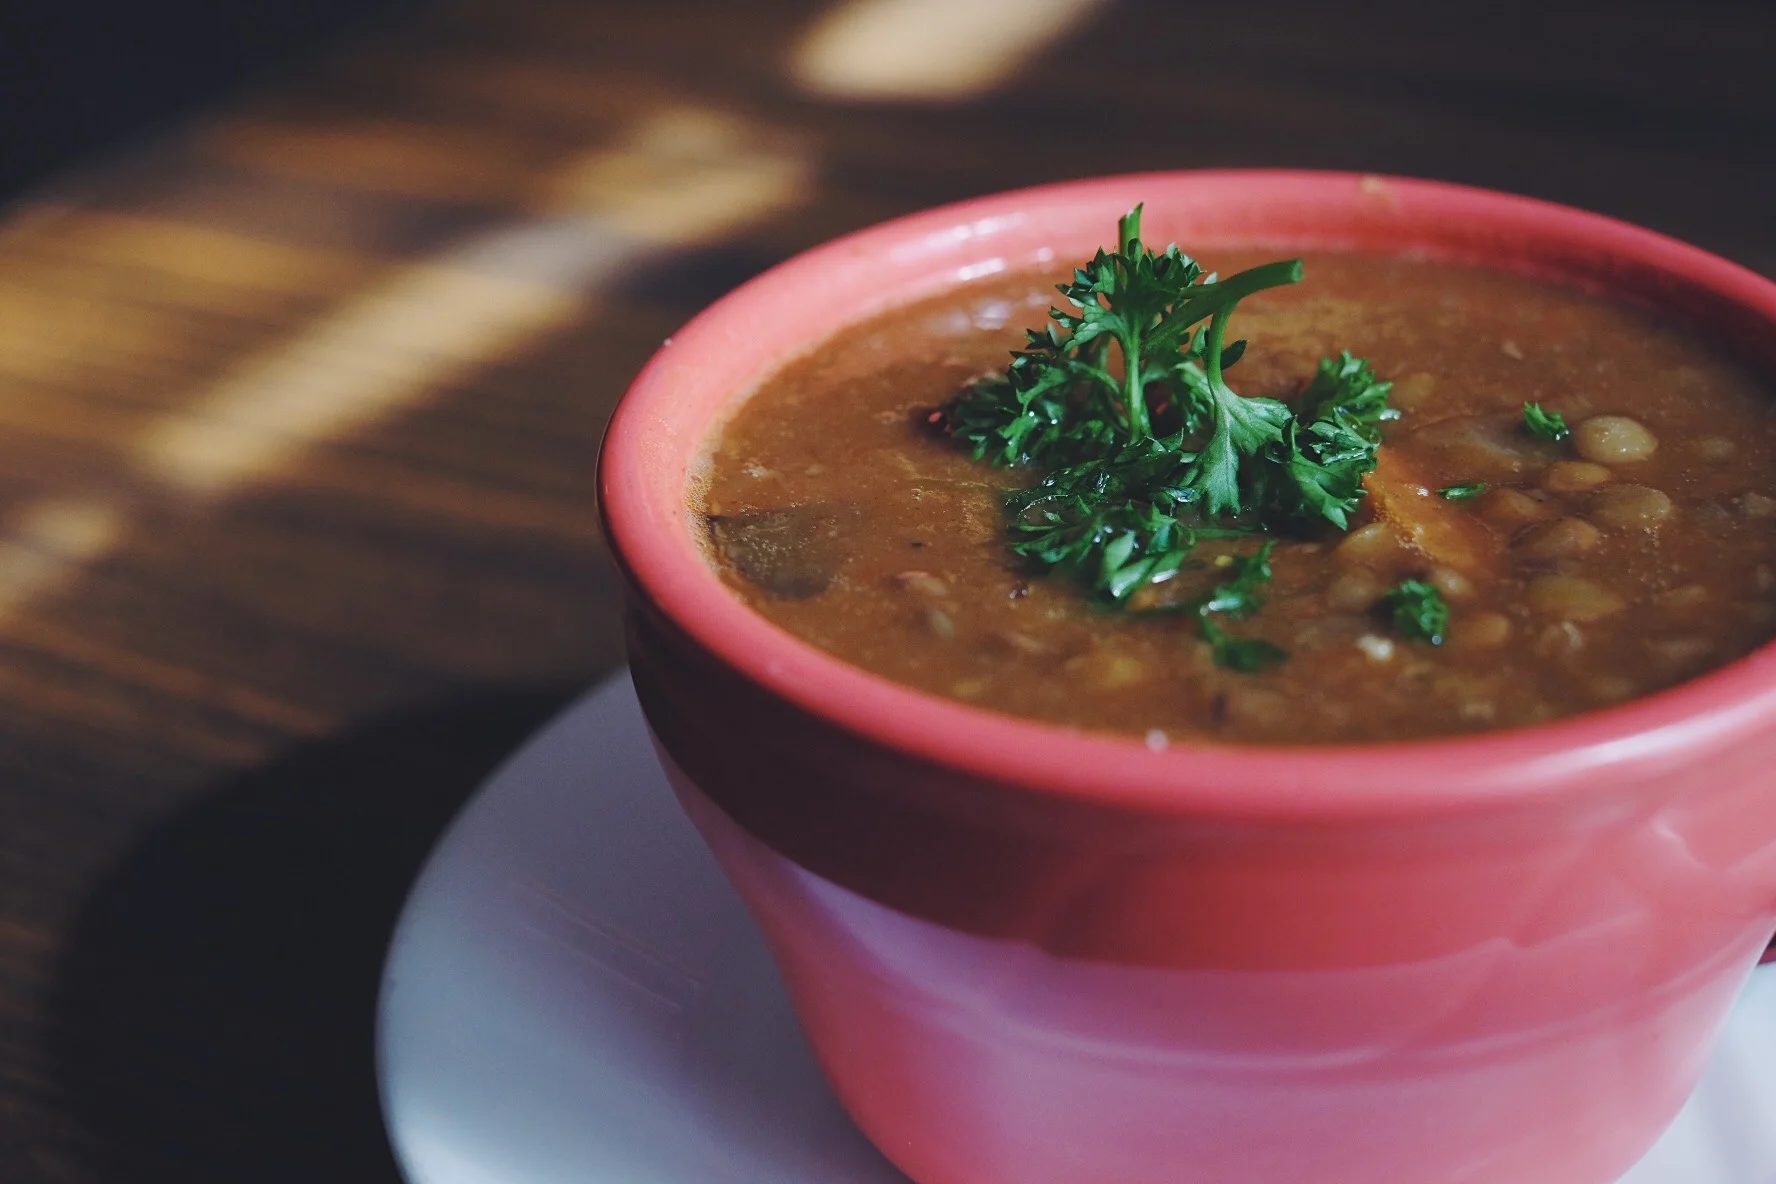 A red cup of brown soup with a green garnish on top